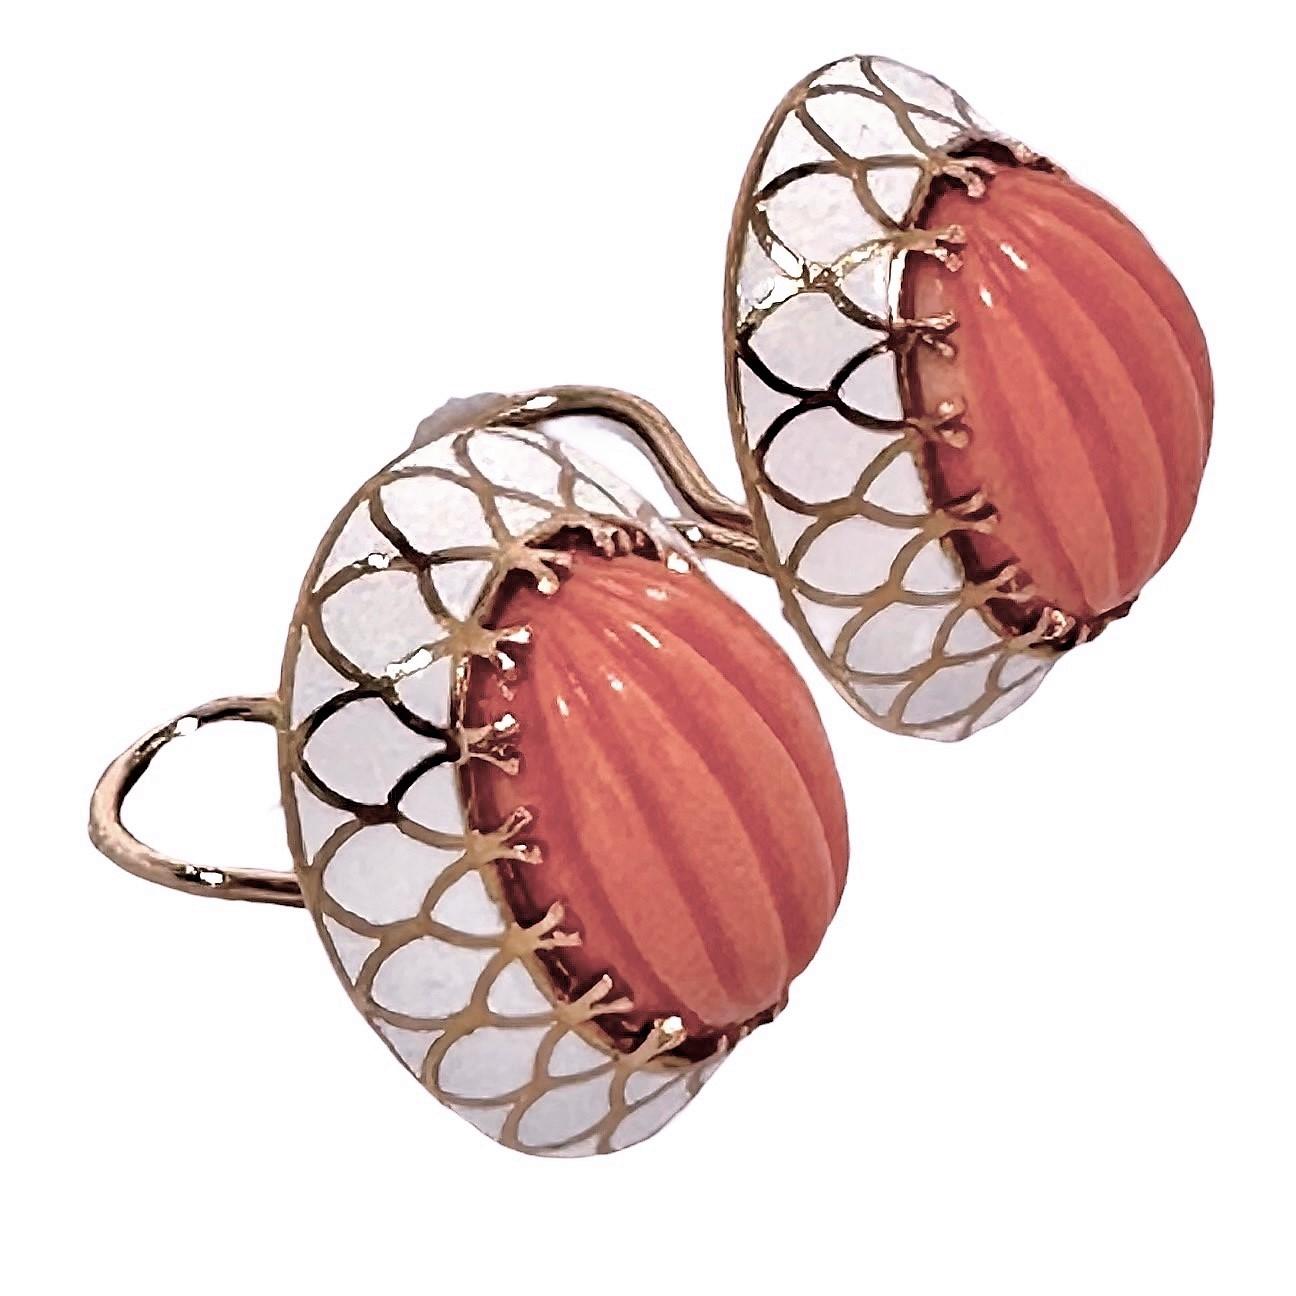 Modern 18k Yellow Gold, Salmon Color Coral and White Enamel Earrings - Great for Summer For Sale